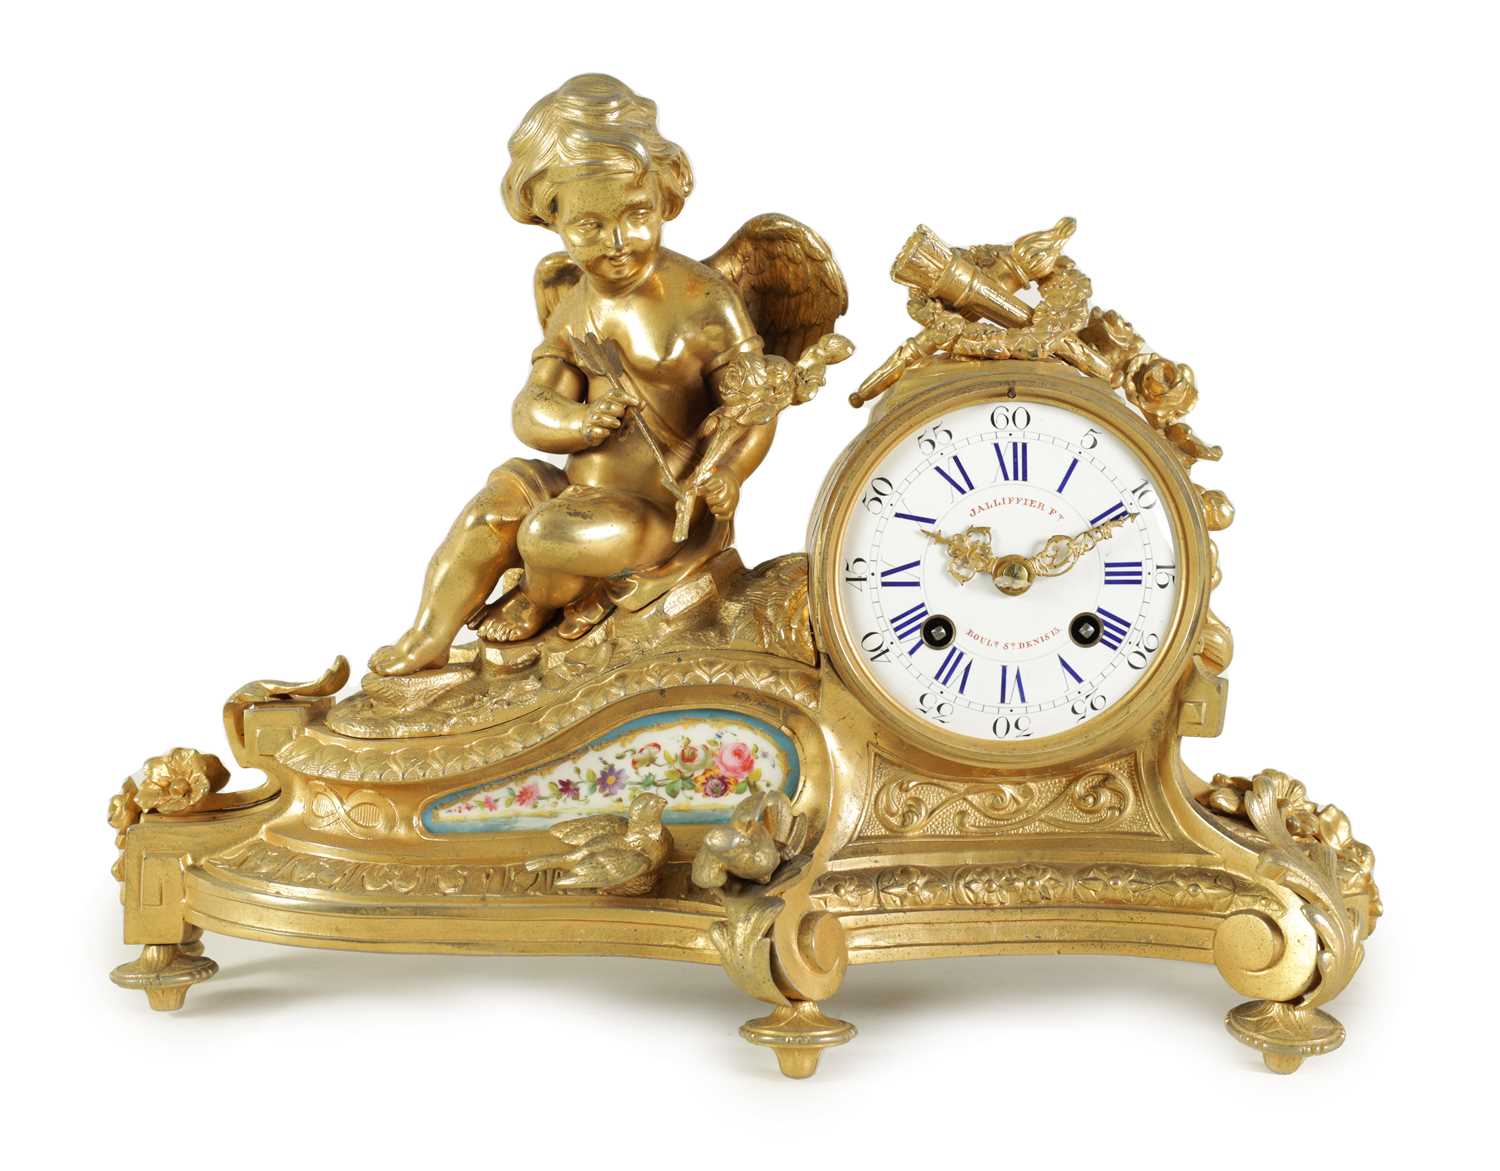 A LATE 19TH CENTURY FRENCH GILT METAL AND PORCELAIN FIGURAL MANTEL CLOCK